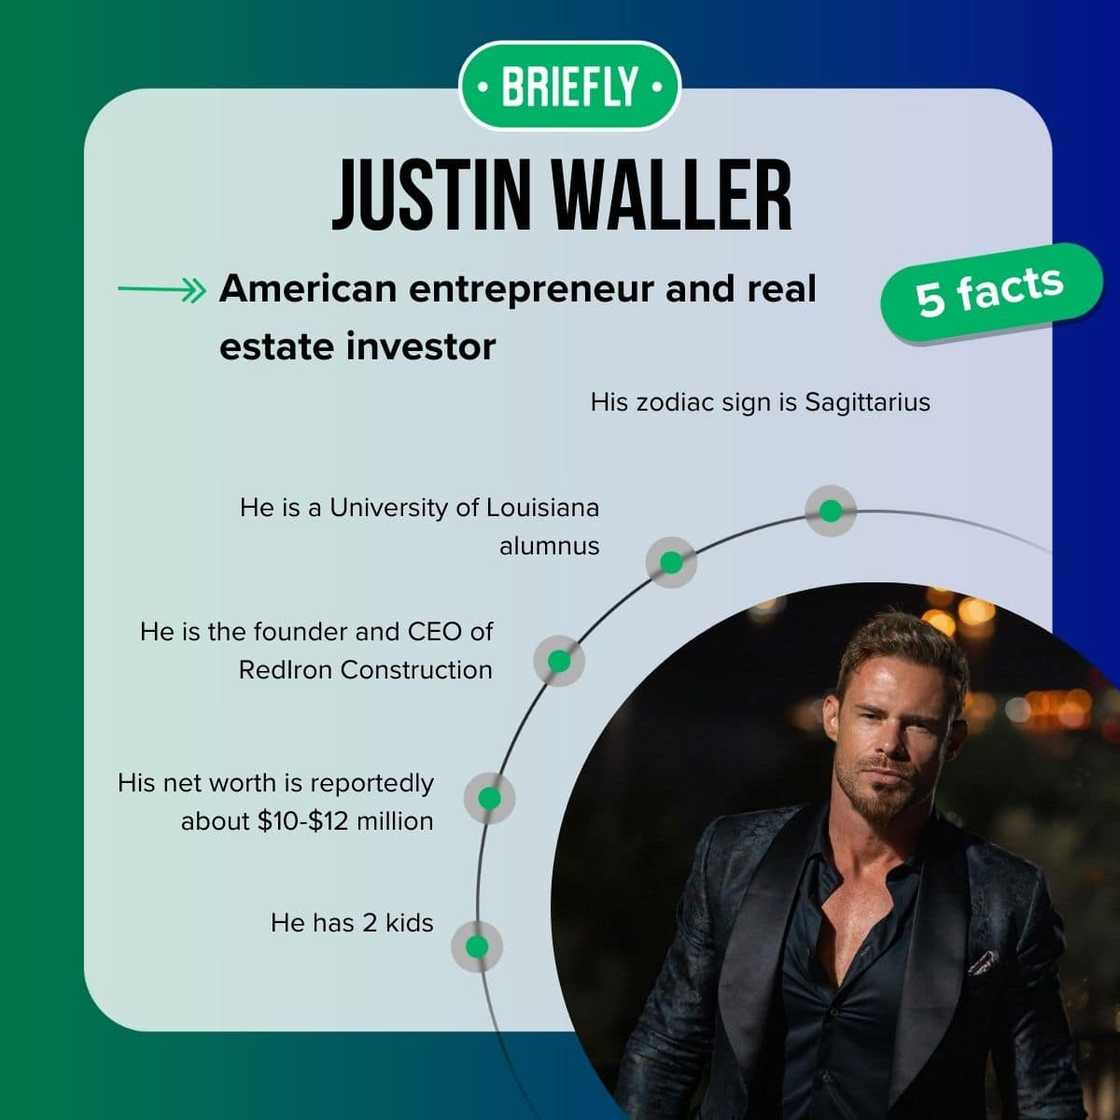 Justin Waller's facts